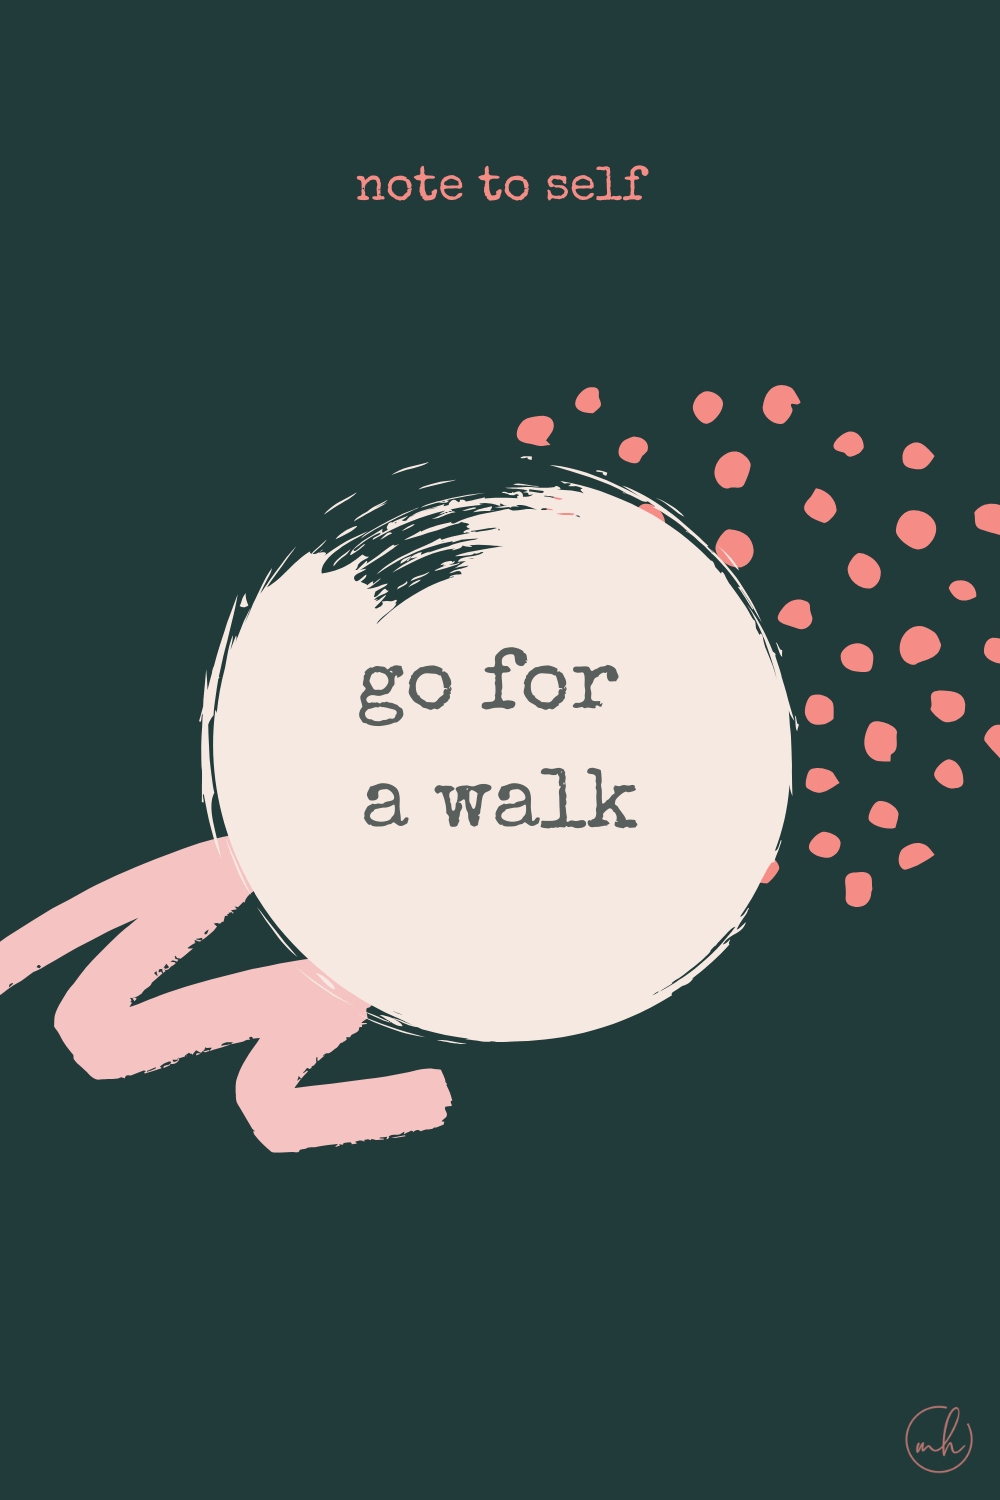 Go for a walk - Note to self quotes | myhoogah